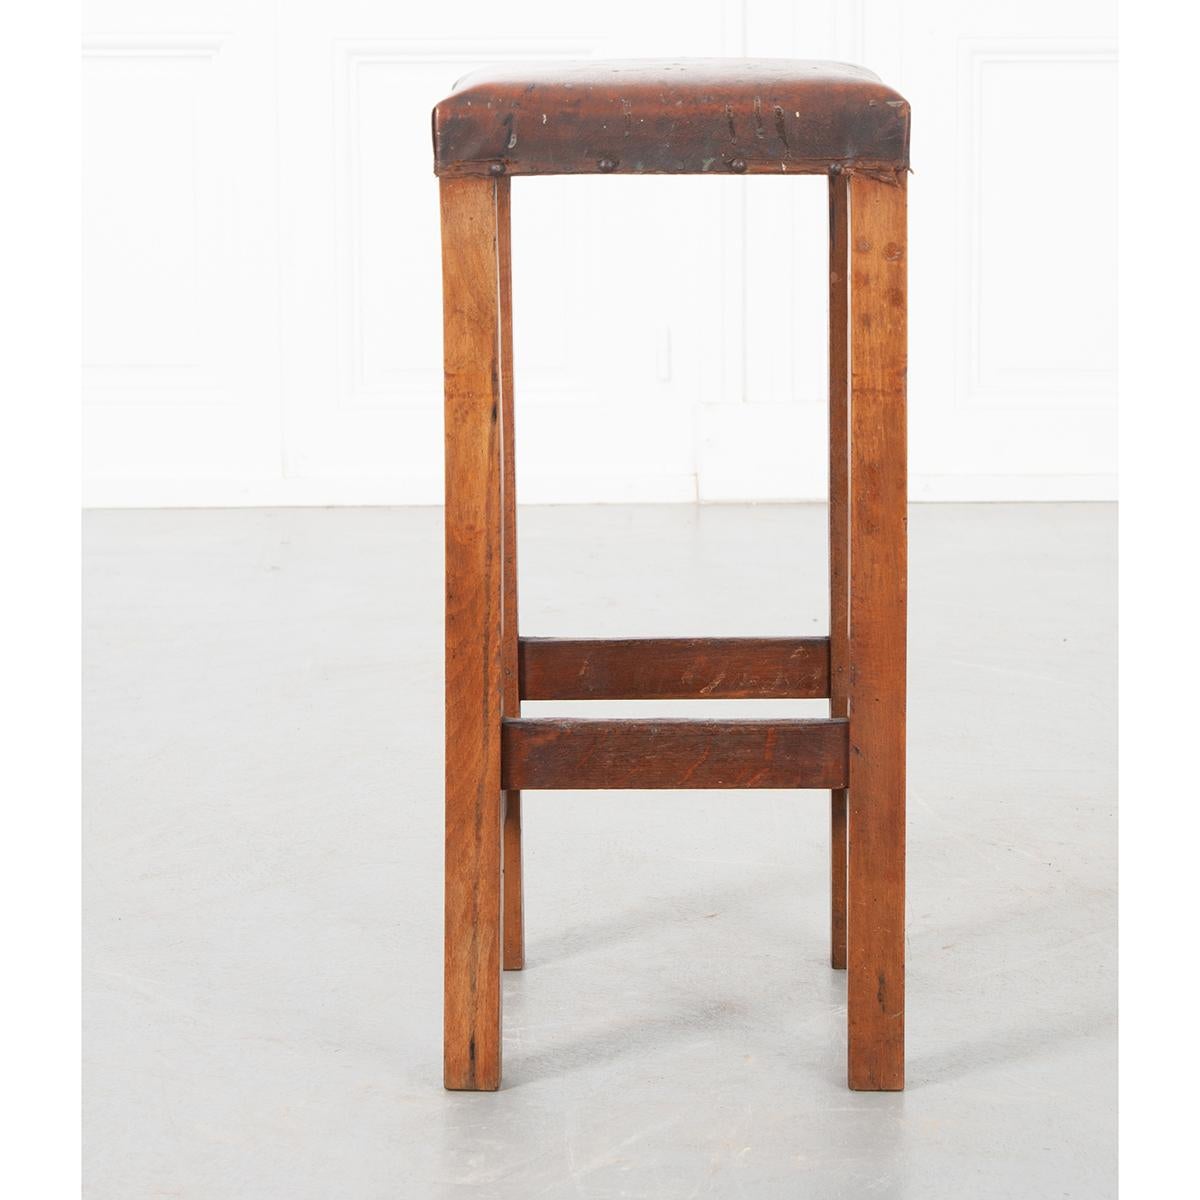 This is an English 19th century tall stool with simple straight legs and stretchers. The wood is walnut and the seat is upholstered. Circa 1890.